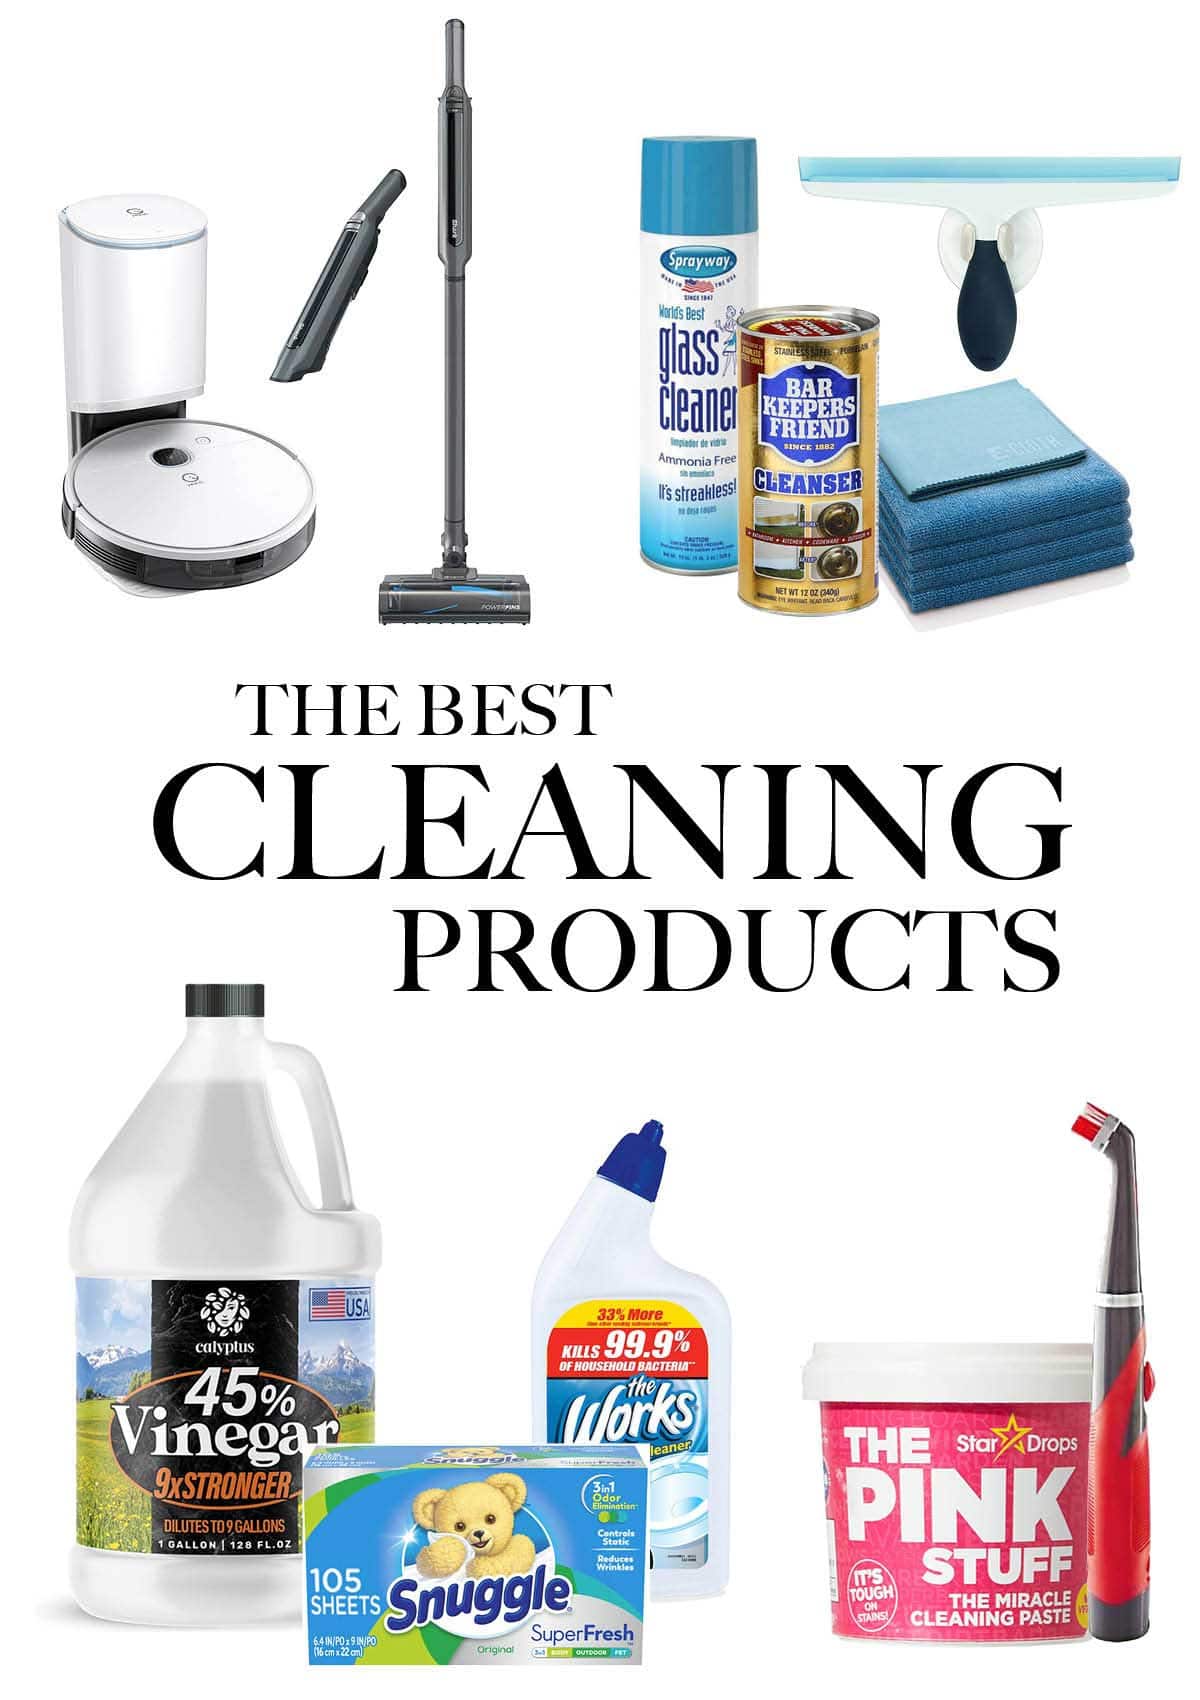 Best Cleaning Products for the home